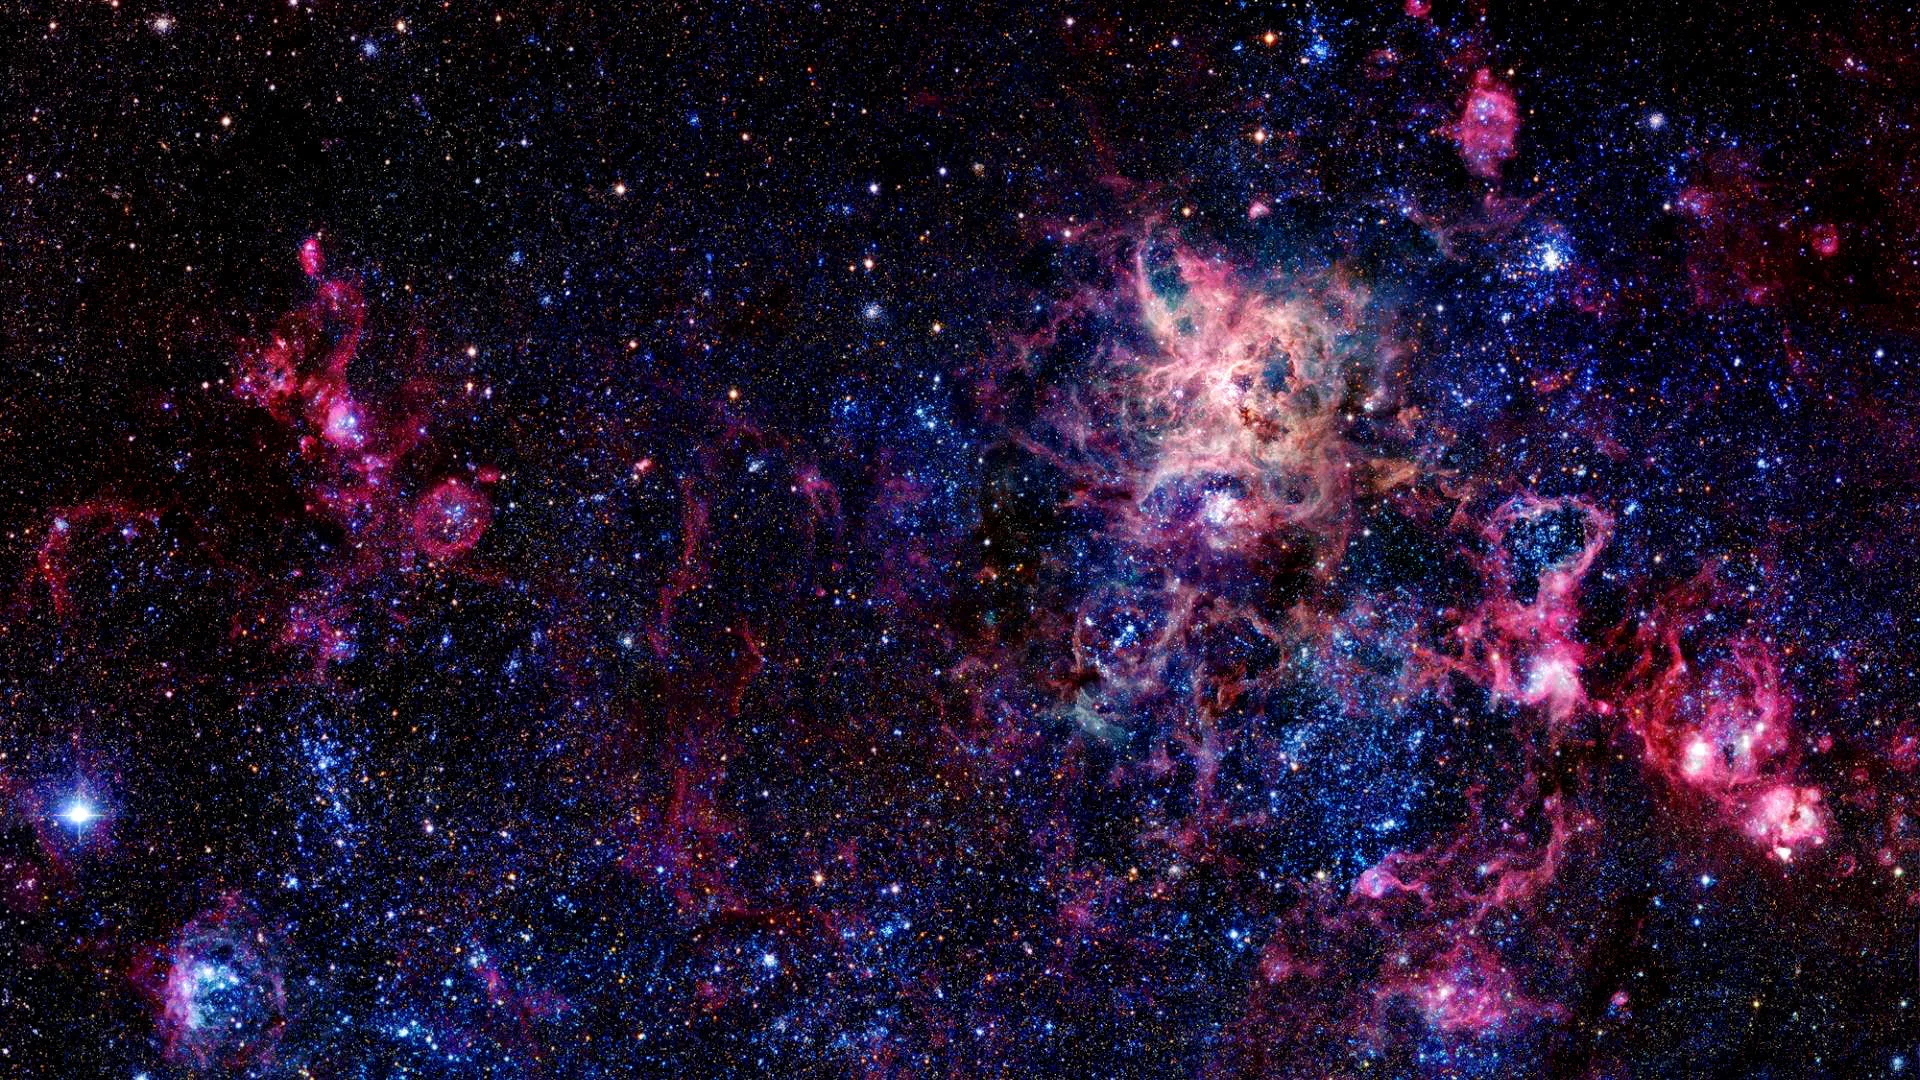 Galaxy in space – Wicked Wallpaper – FREE HD wallpapers | HD Space  Wallpapers | Pinterest | Hd space